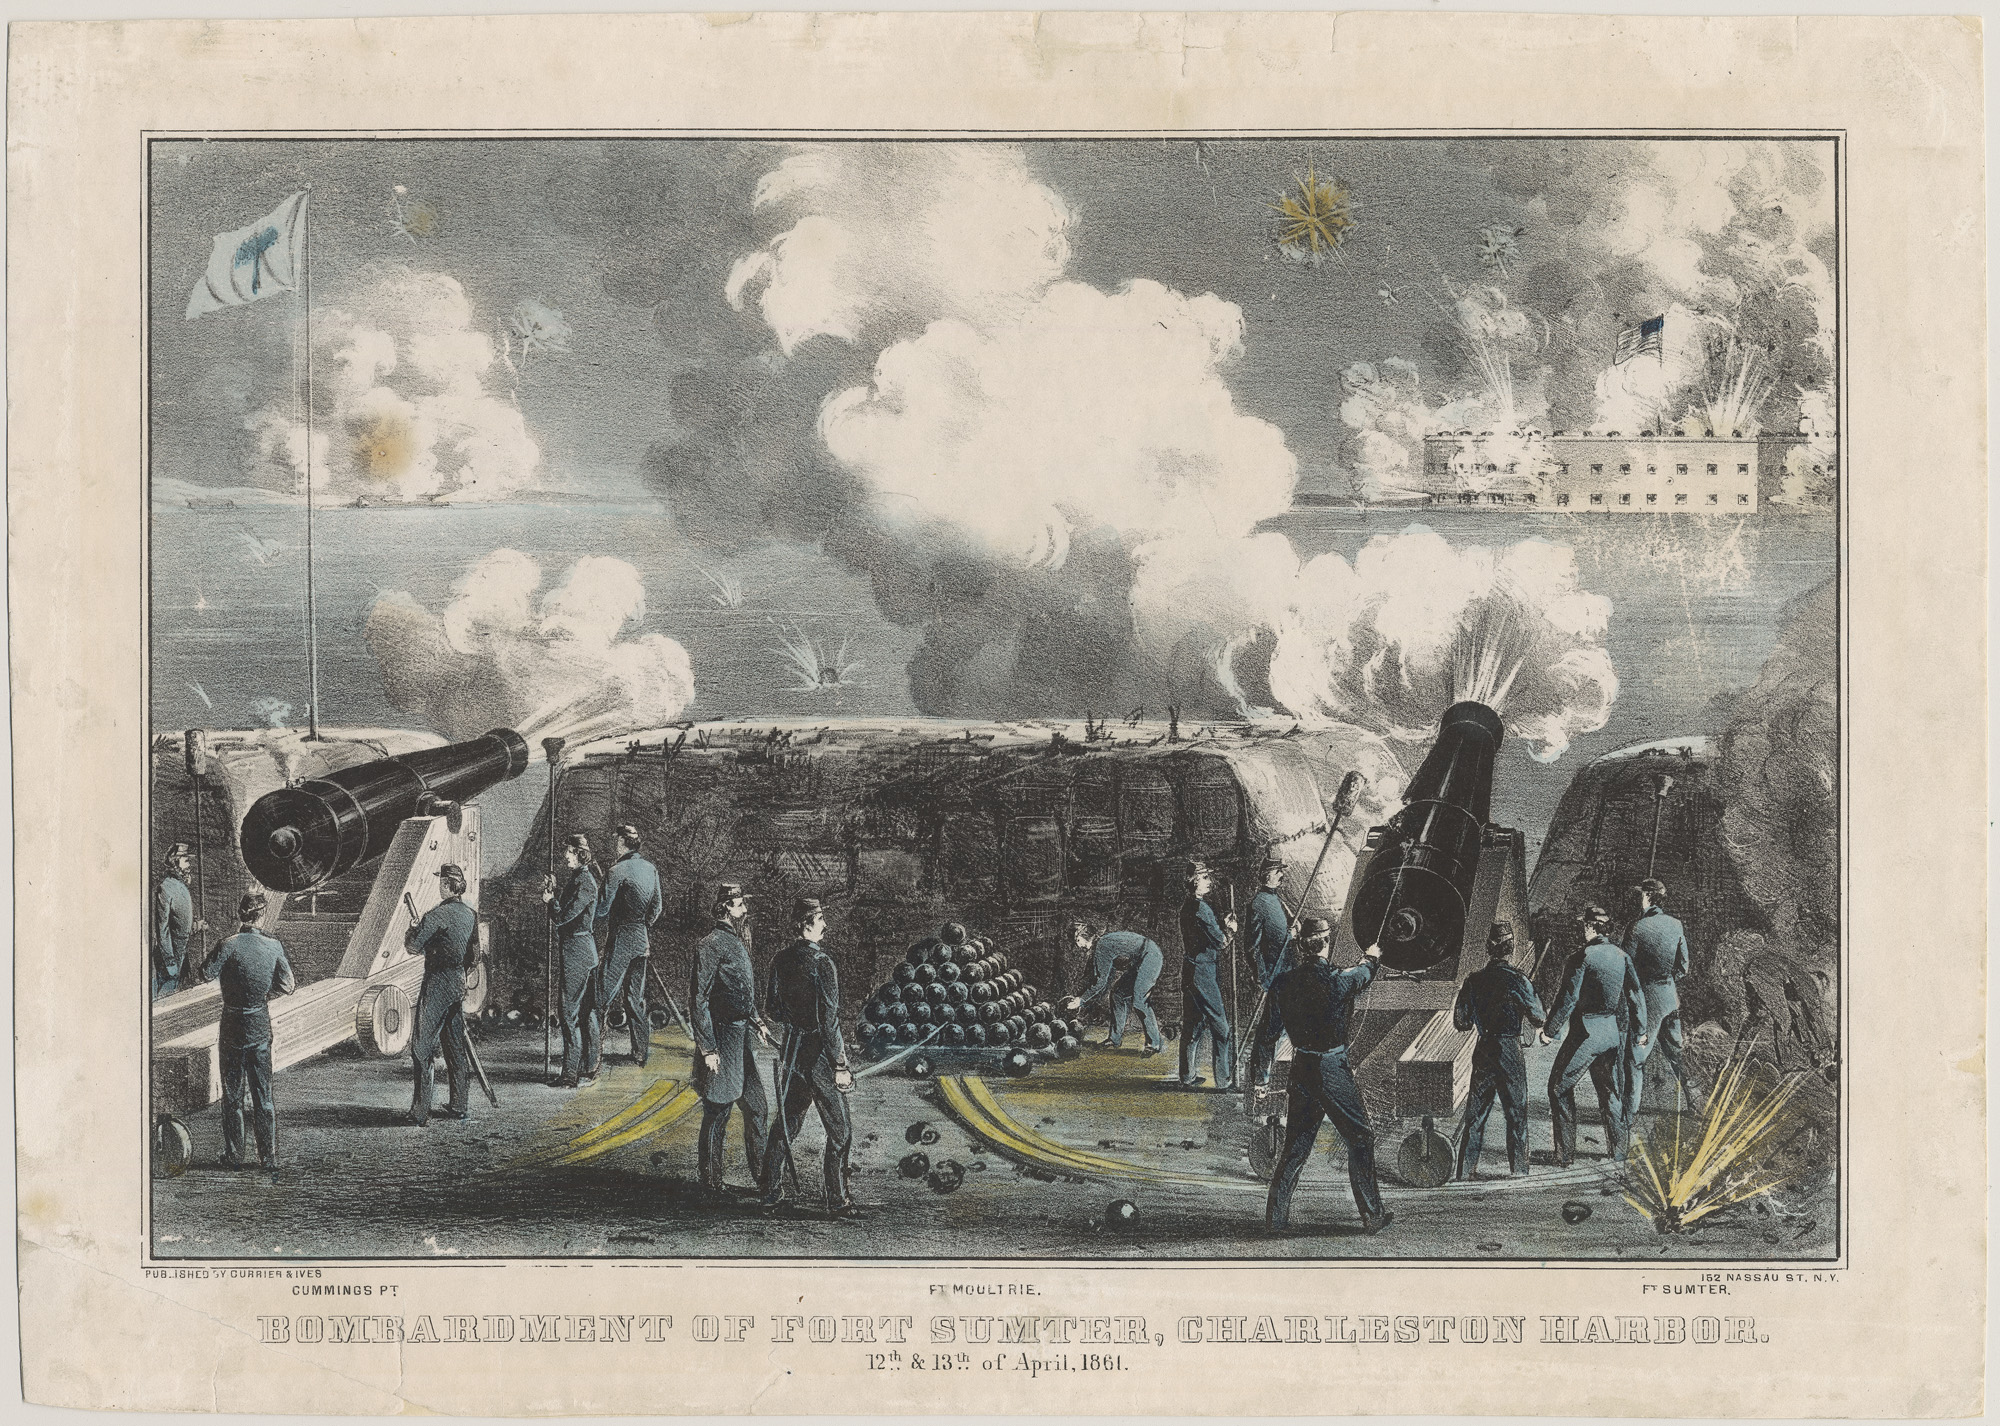 Bombardment of Fort Sumter, Charleston Harbor, 1861, Currier and Ives lithograph 10 x 14 inches (Chicago History Museum)